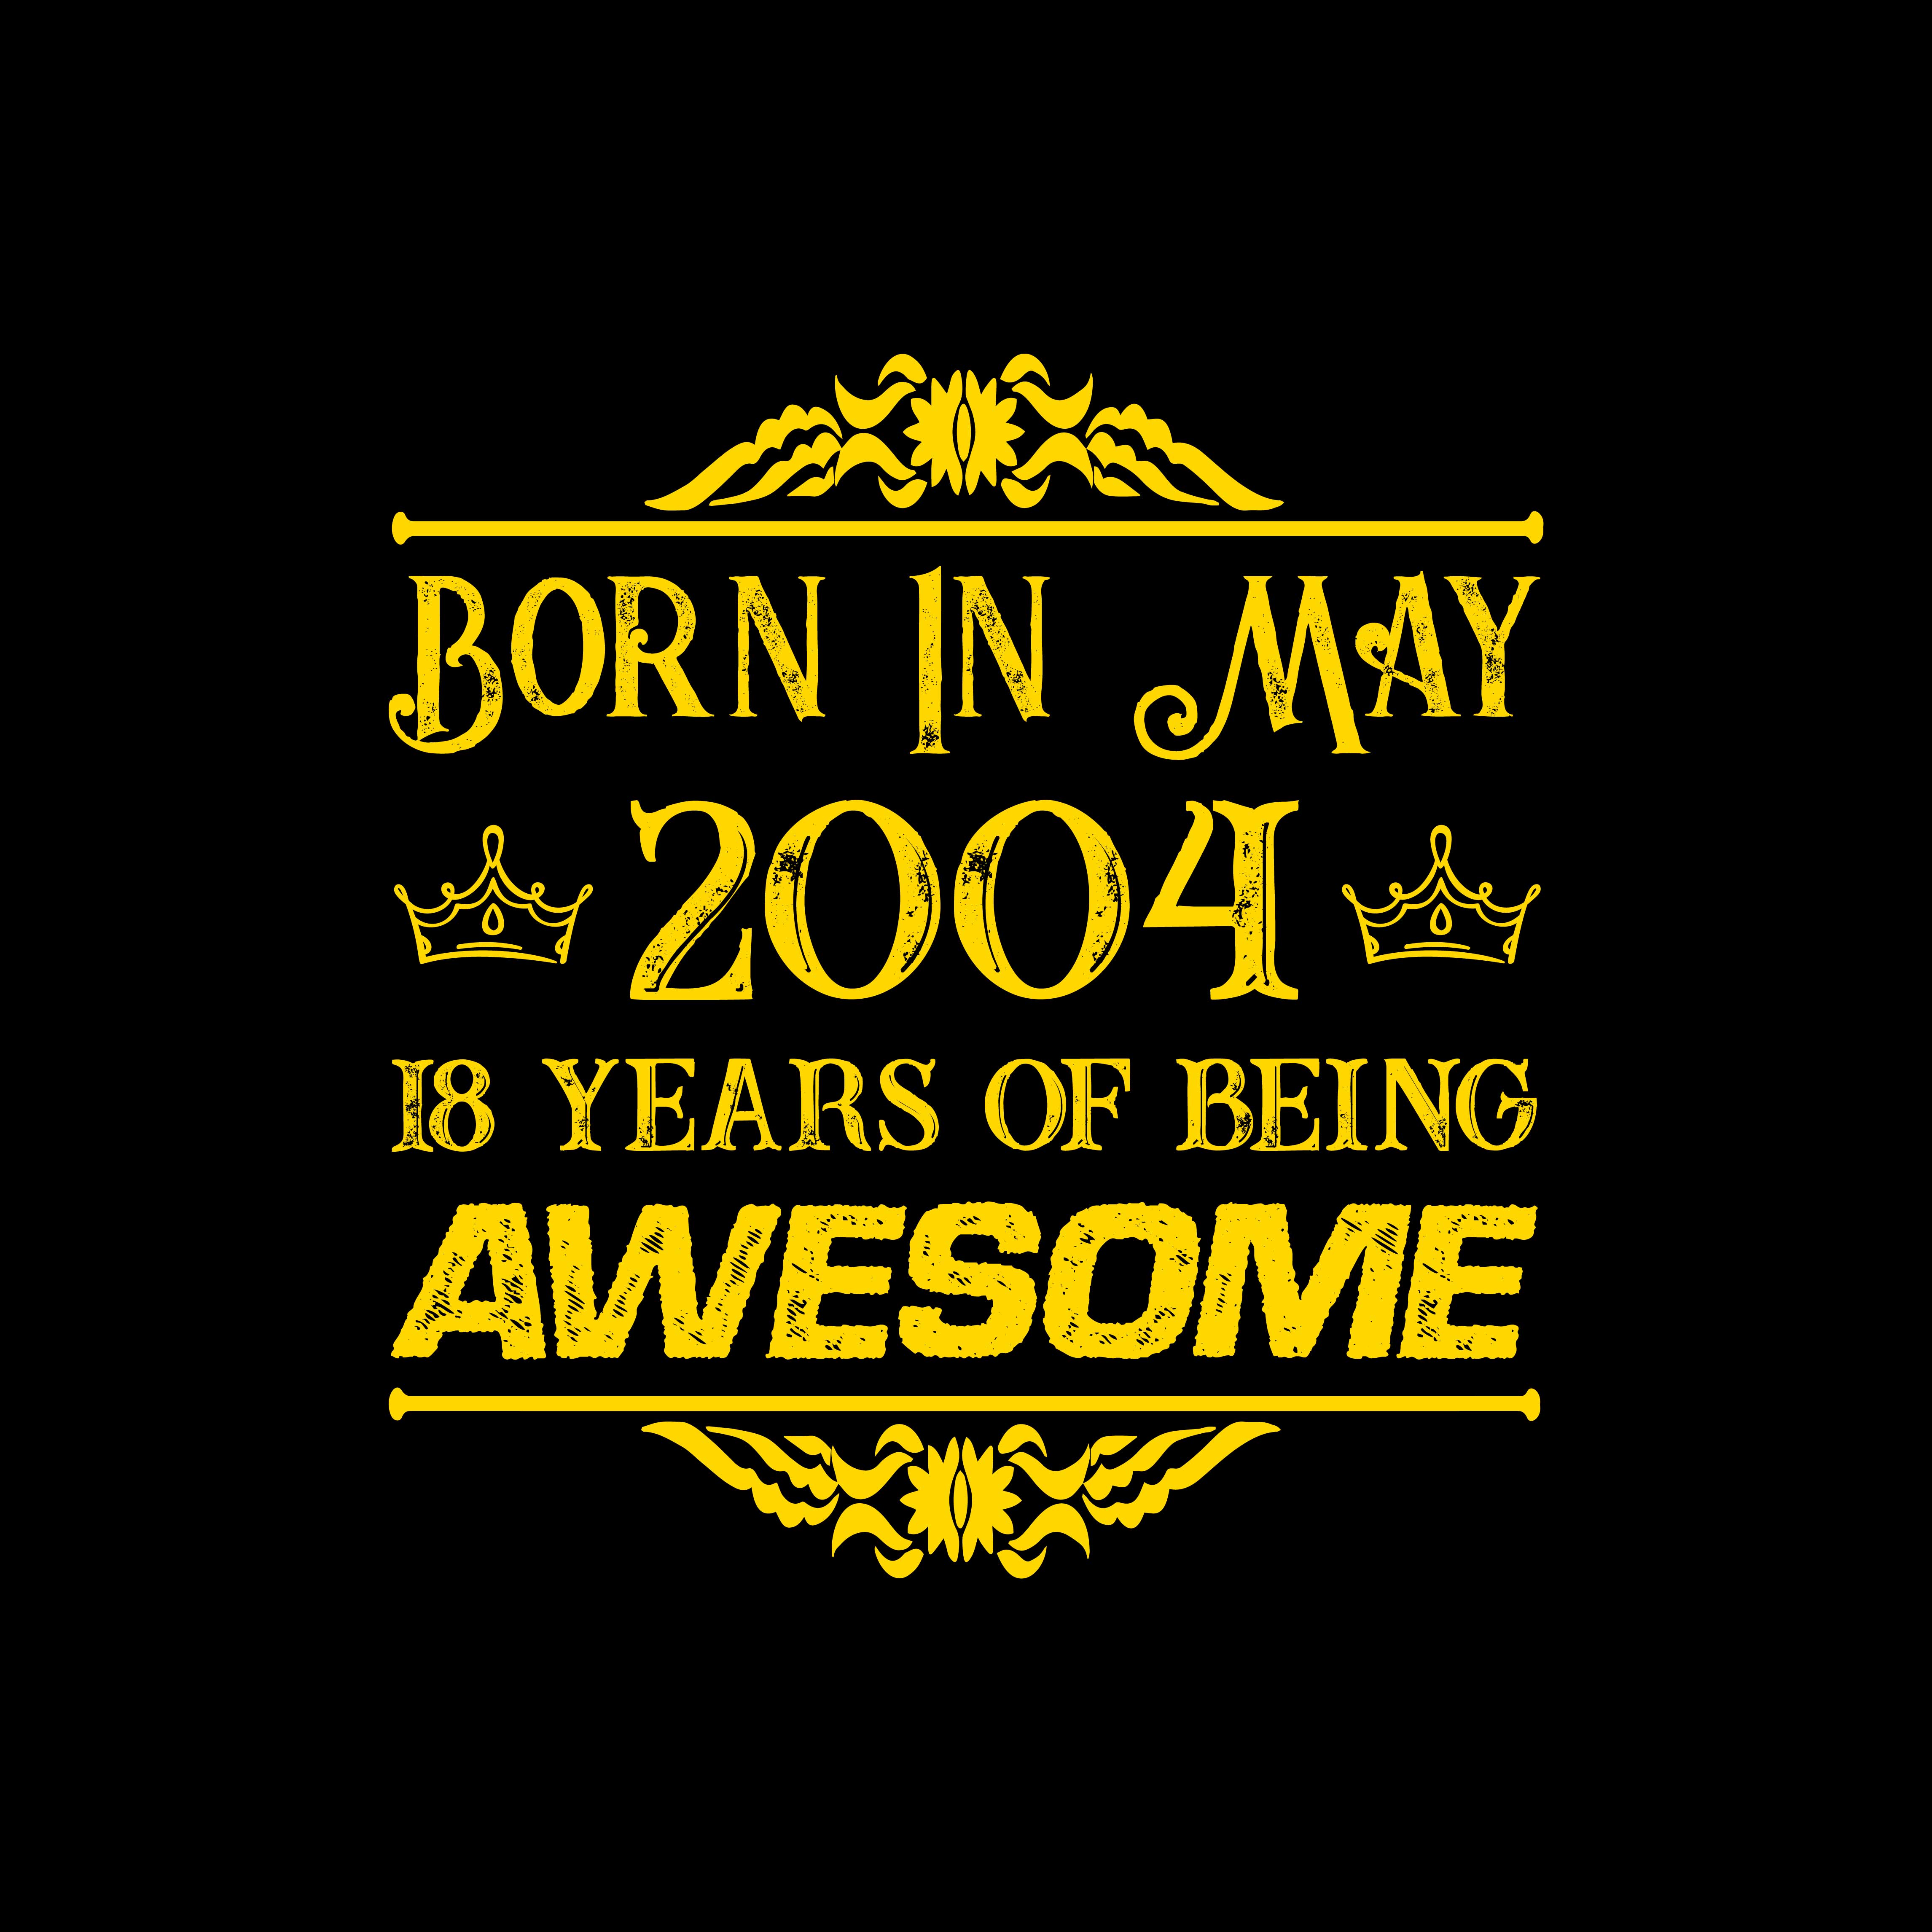 born in may 2004 18 years of being awesome 01 697